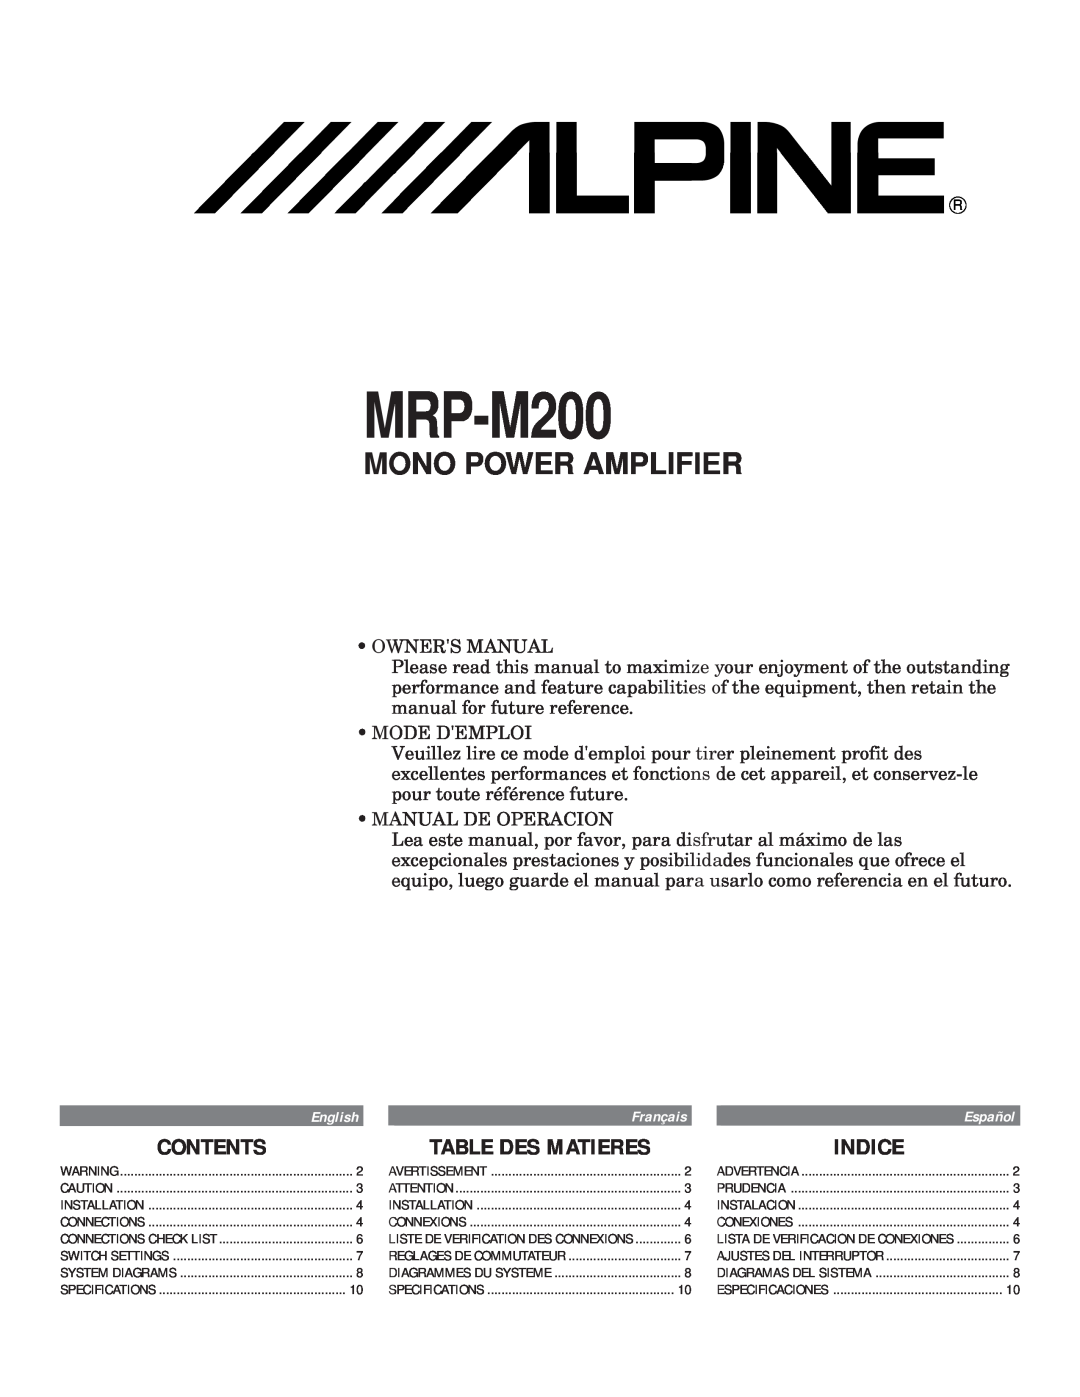 Alpine MRP-M200 owner manual Contents, Table Des Matieres, Indice, Mono Power Amplifier 